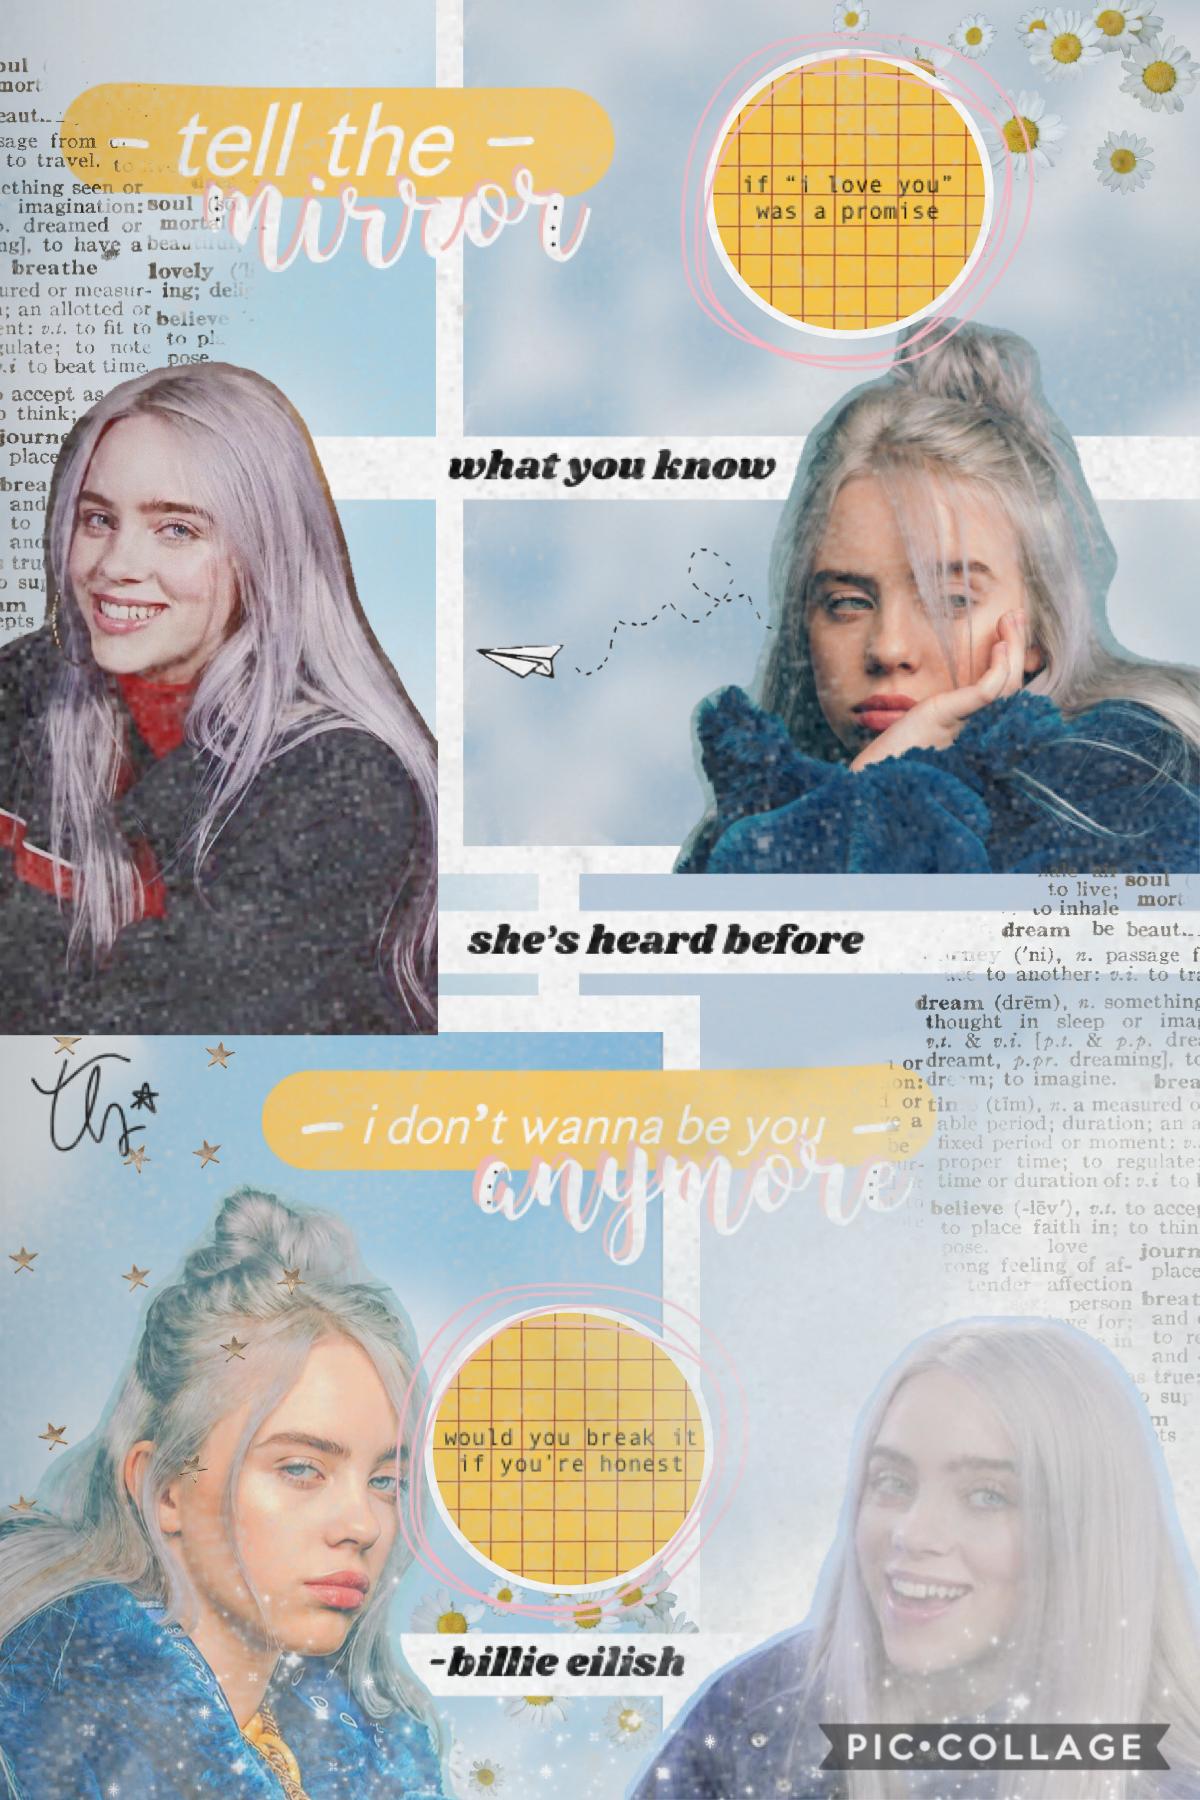 hey シ so this is kind of a basic style but i’m trying to do different styles so it’s gonna be interesting ahahahah 😂 this quote is from idontwannabeyouanymore by billie eilishhhh and yes i’m kind of obsessing over her rn ❤️✨